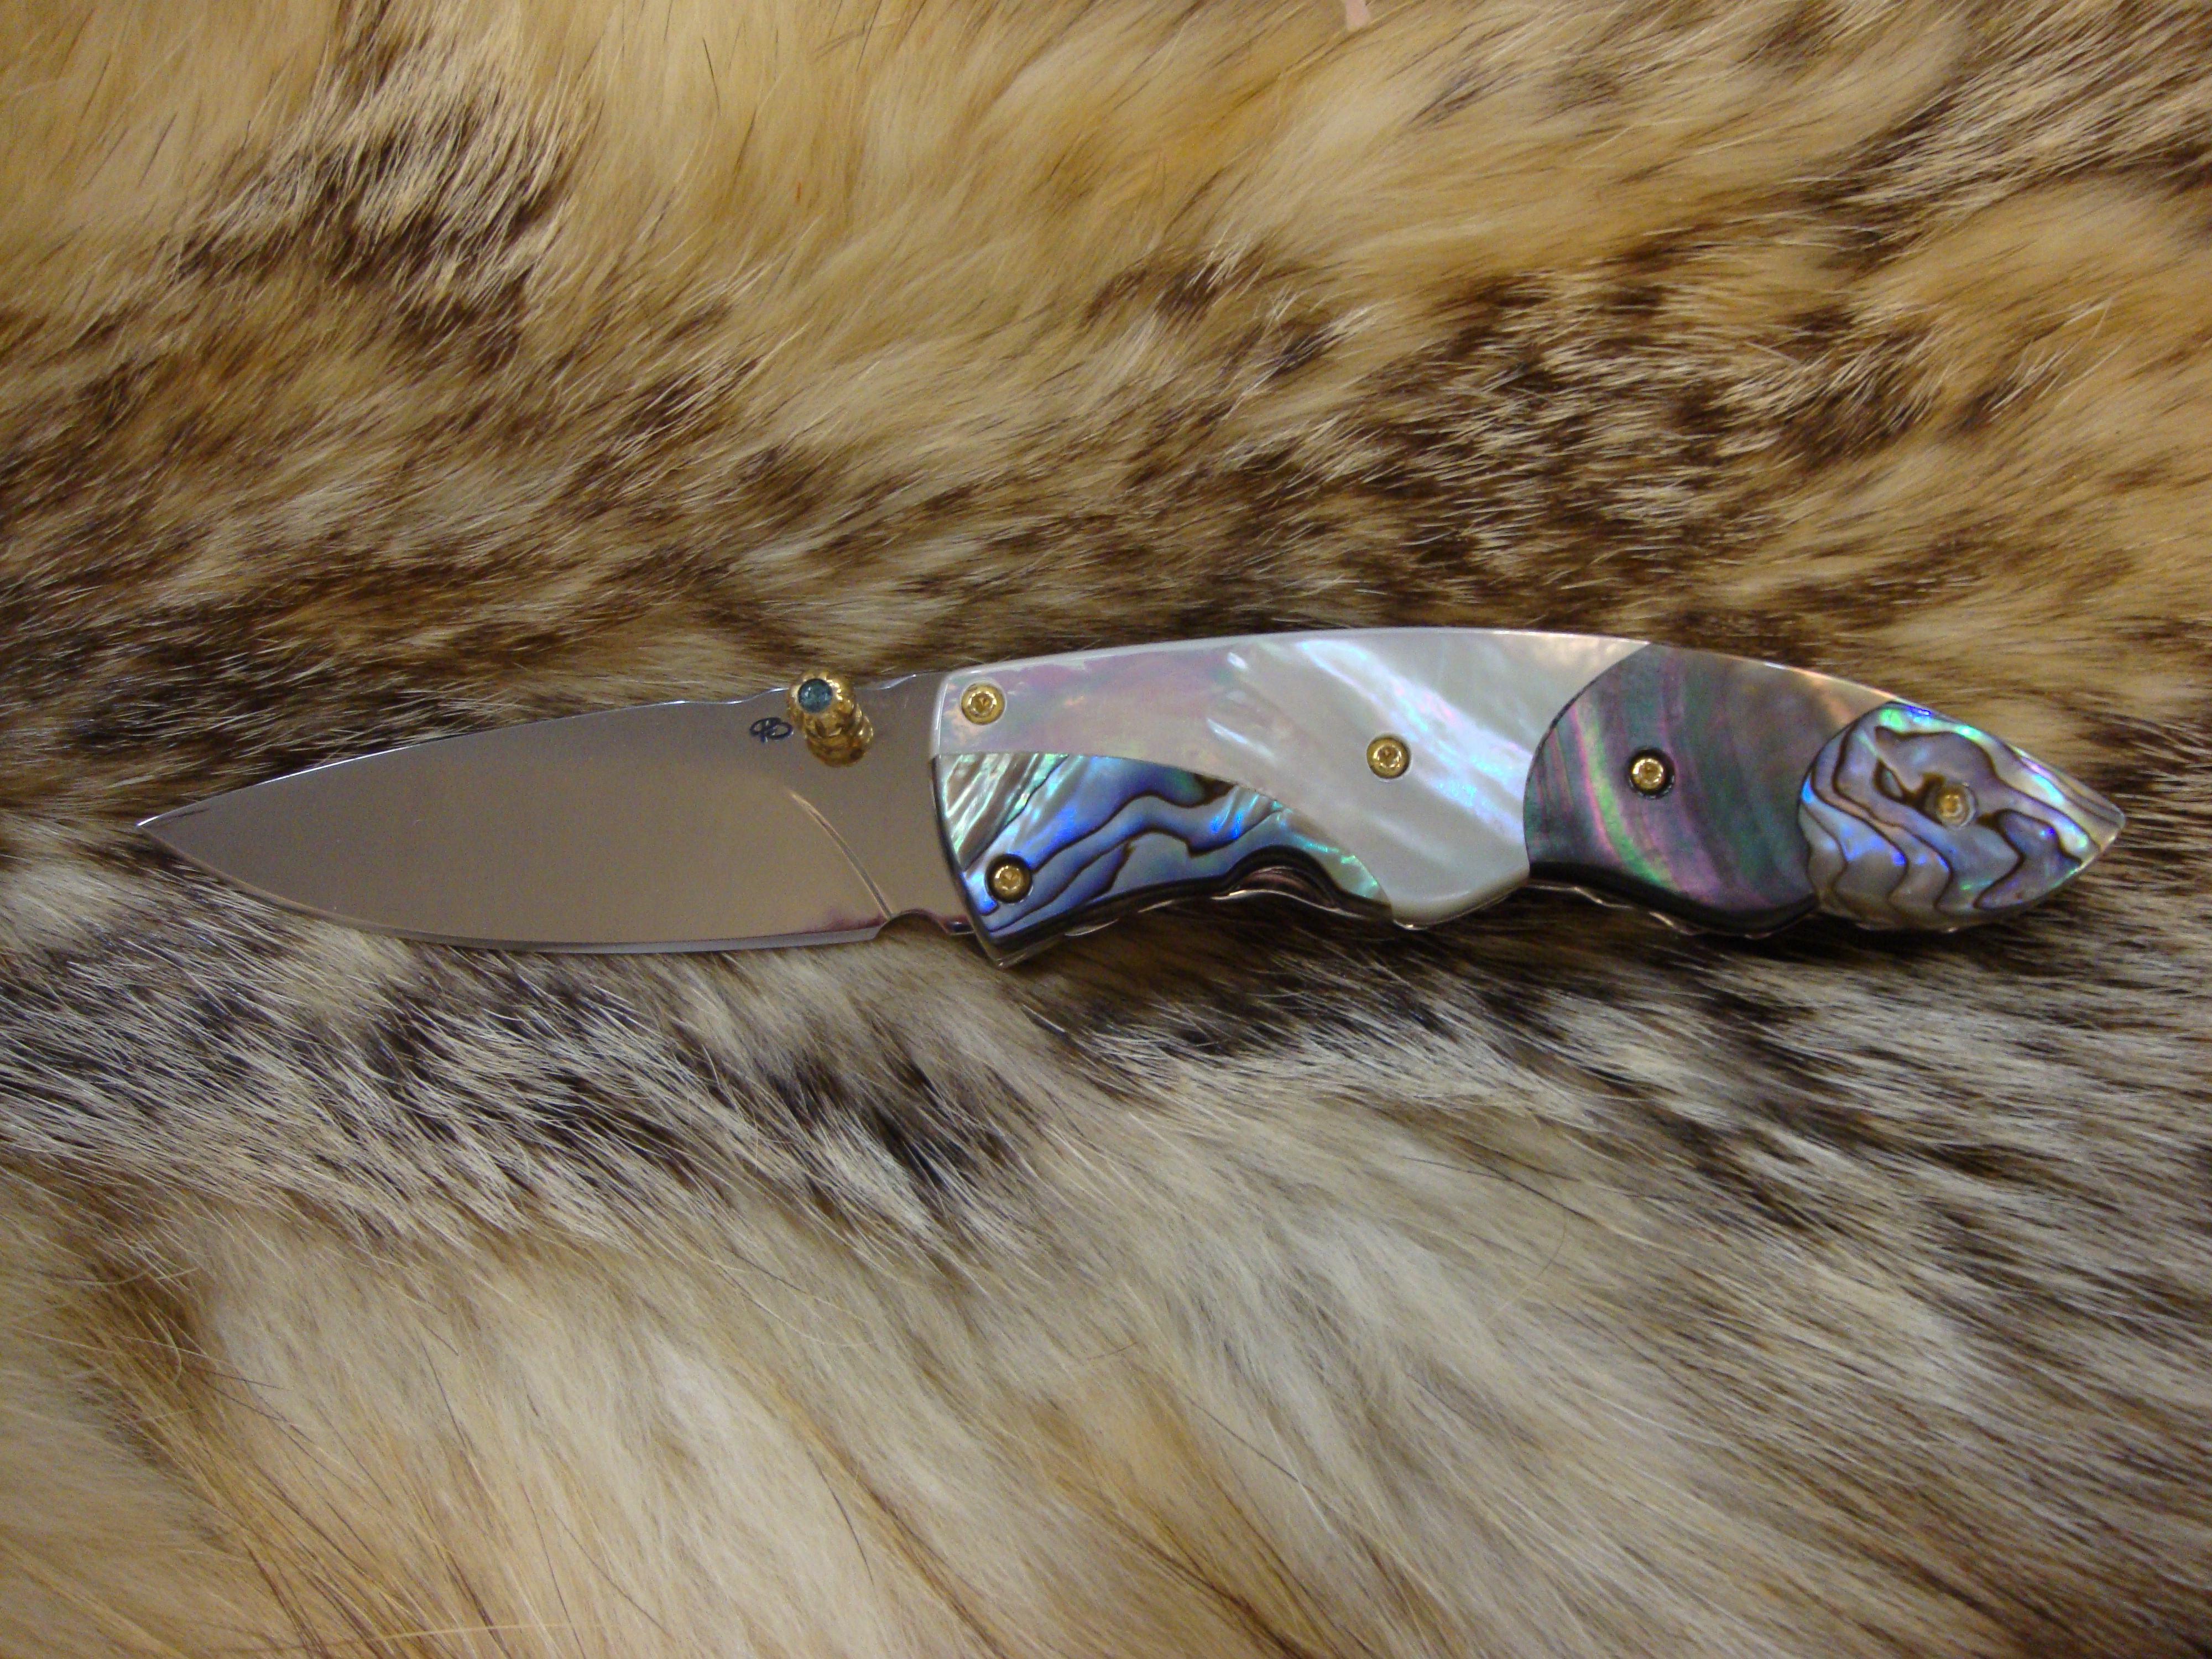 CUSTOM POCKET KNIFE WITH ABALONE, MOTHER OF PEARL AND BLACK LIP PEARL HANDLES